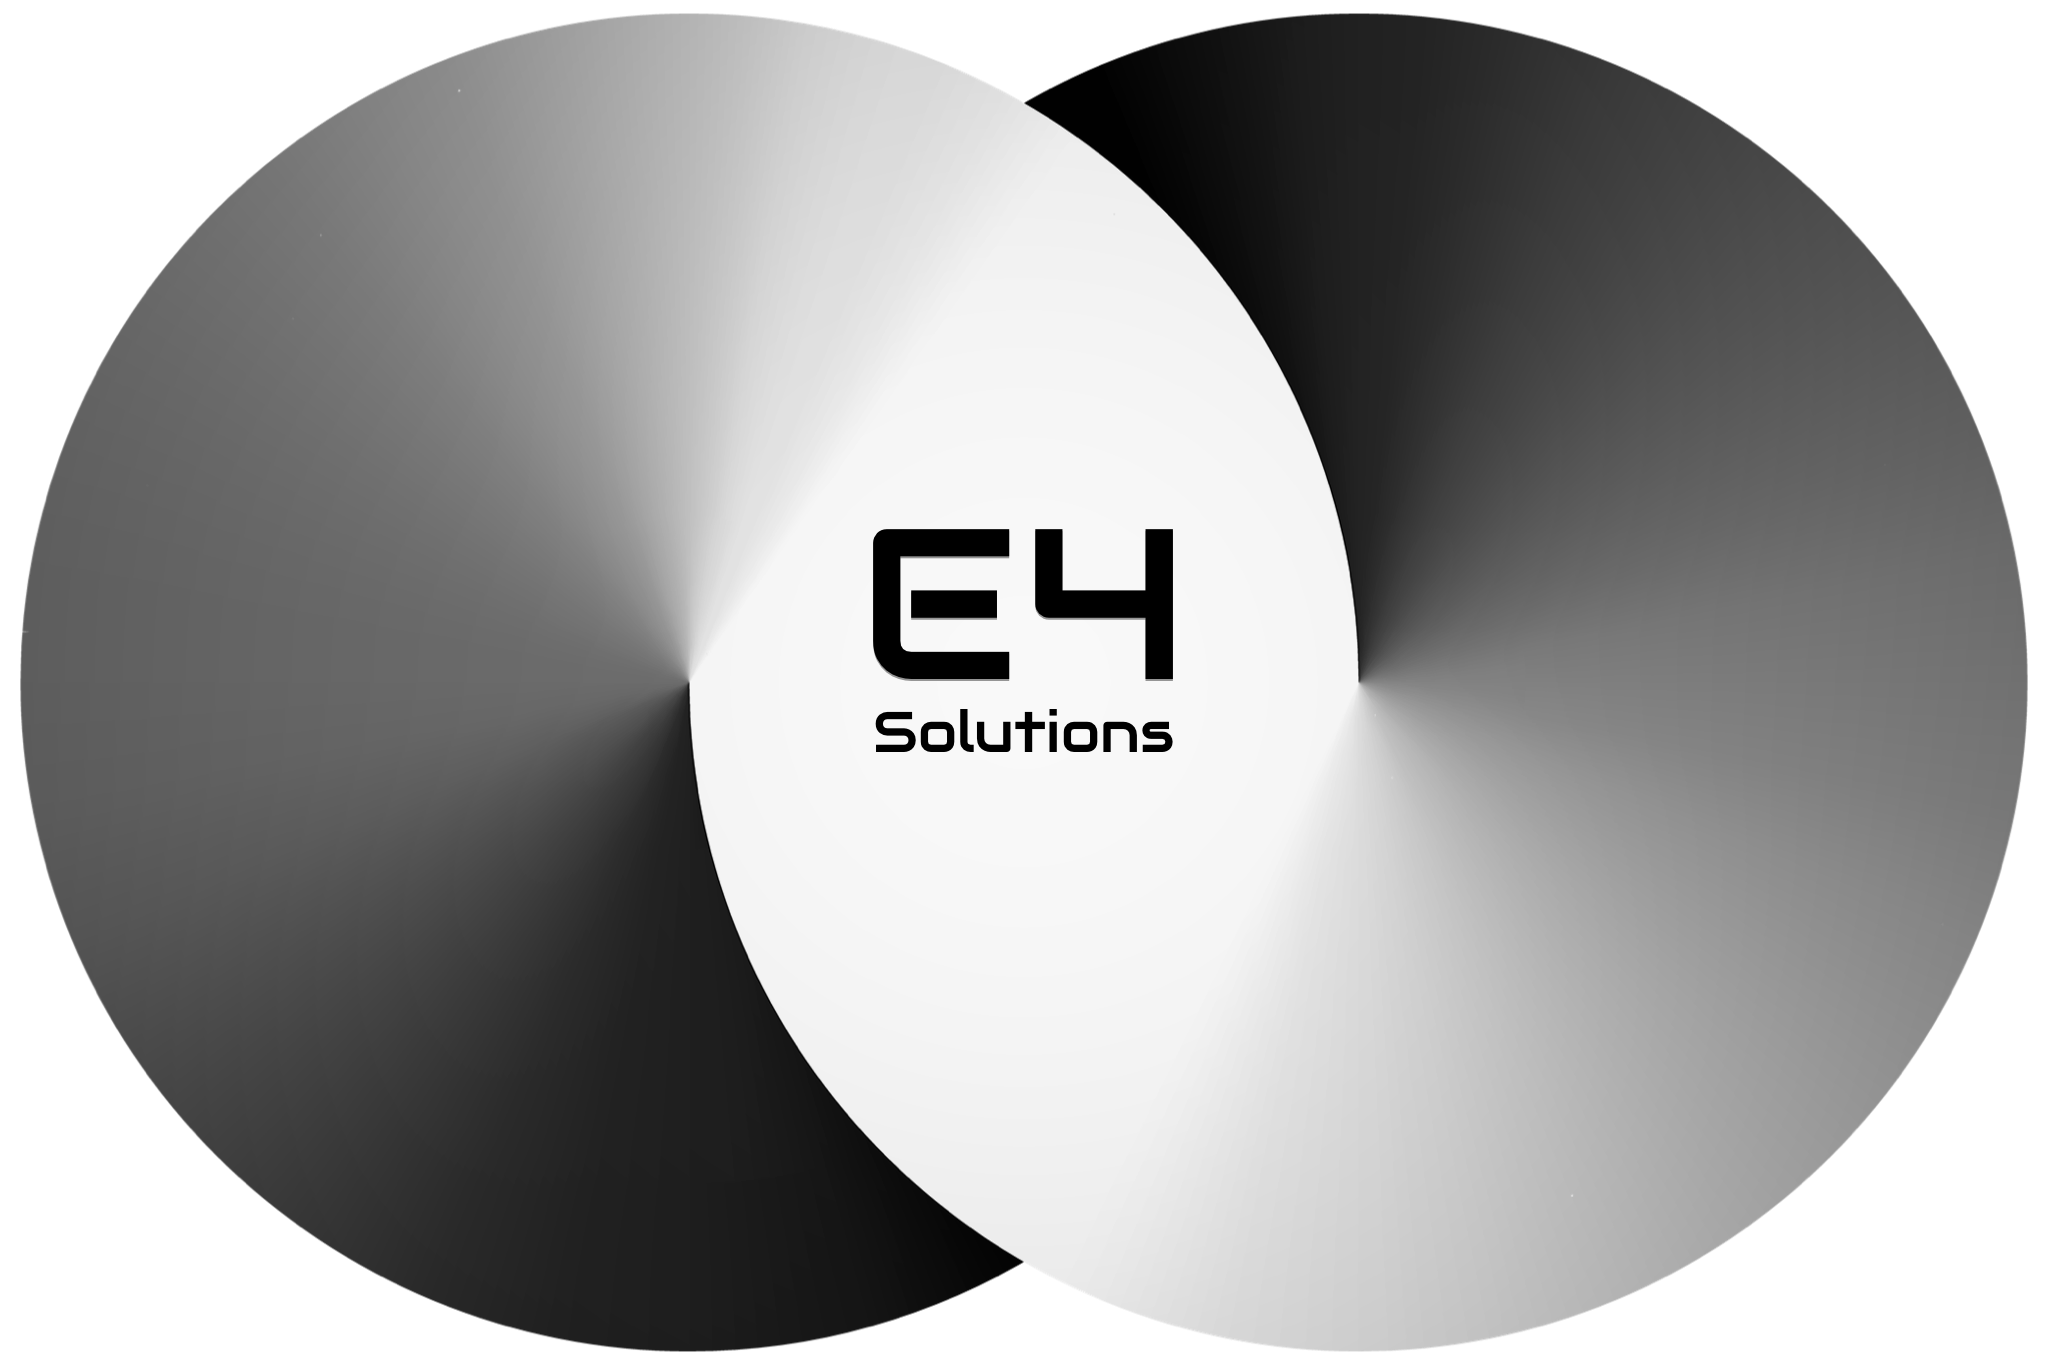 http://www.e4solutions.ca/